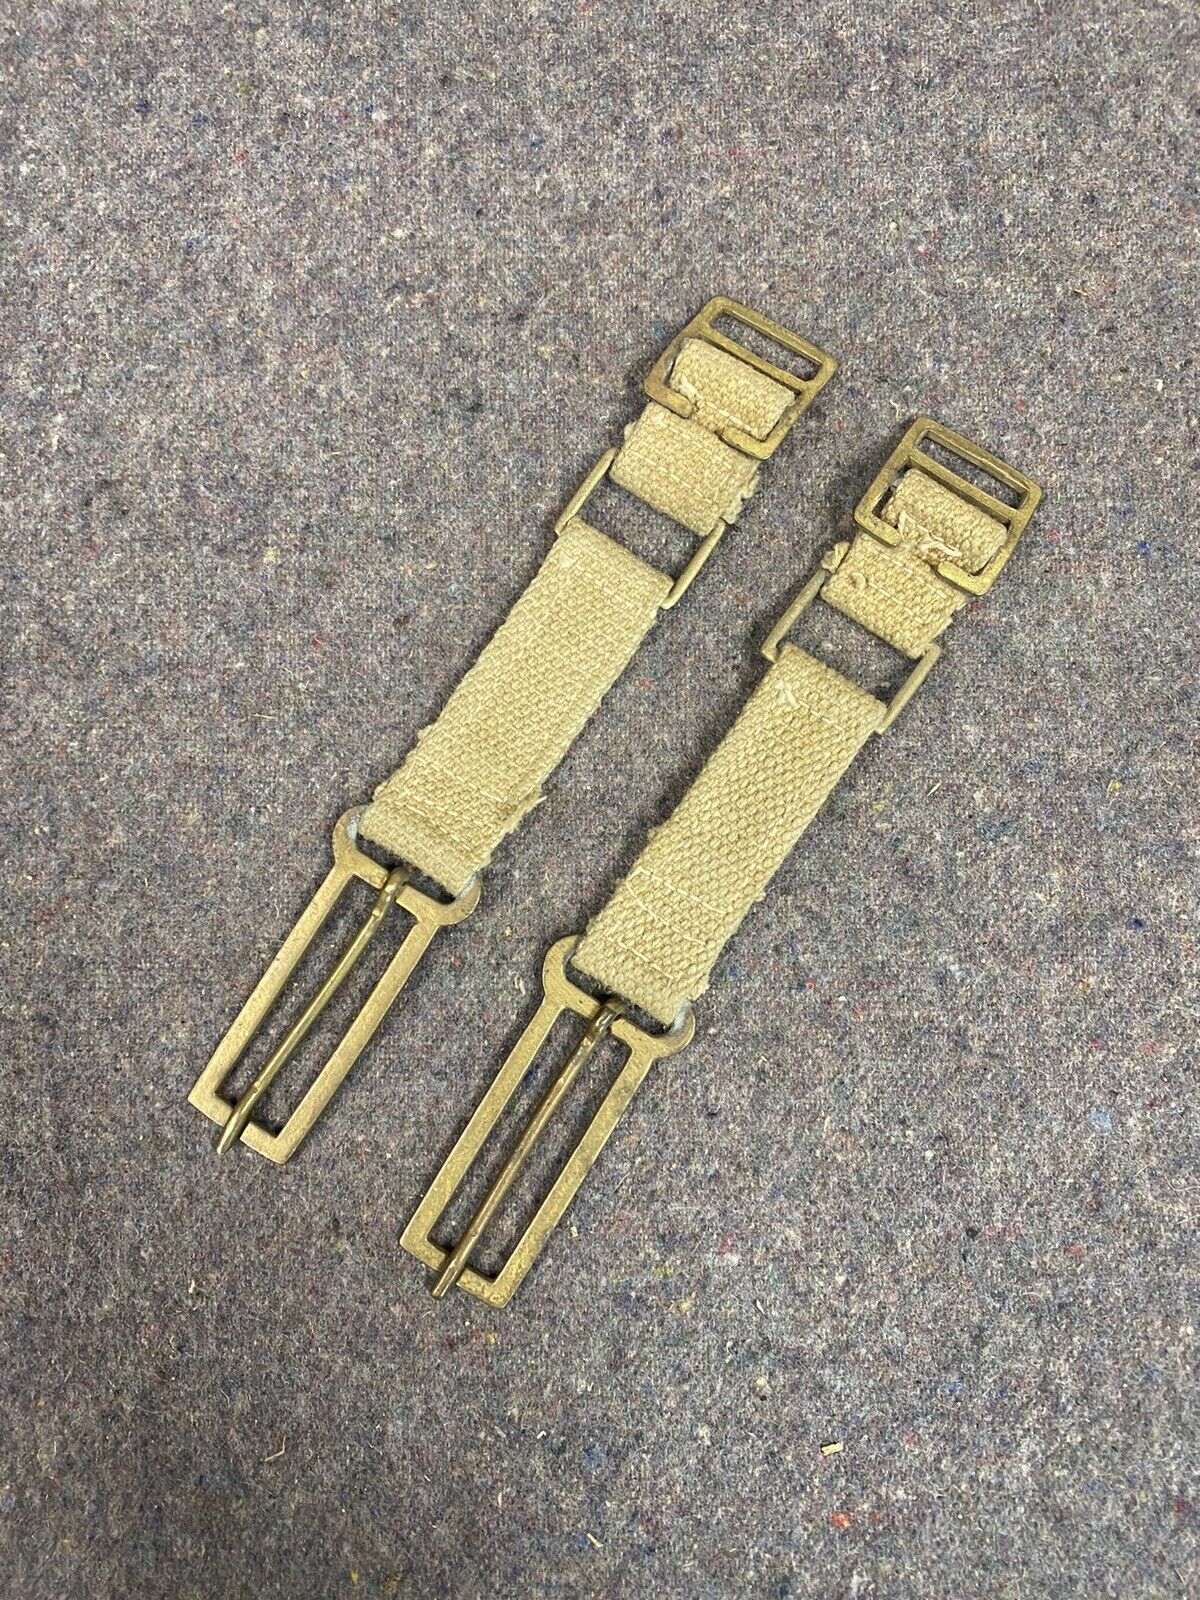 WW2 Indian Made Officers Brace Attachments C-IP5